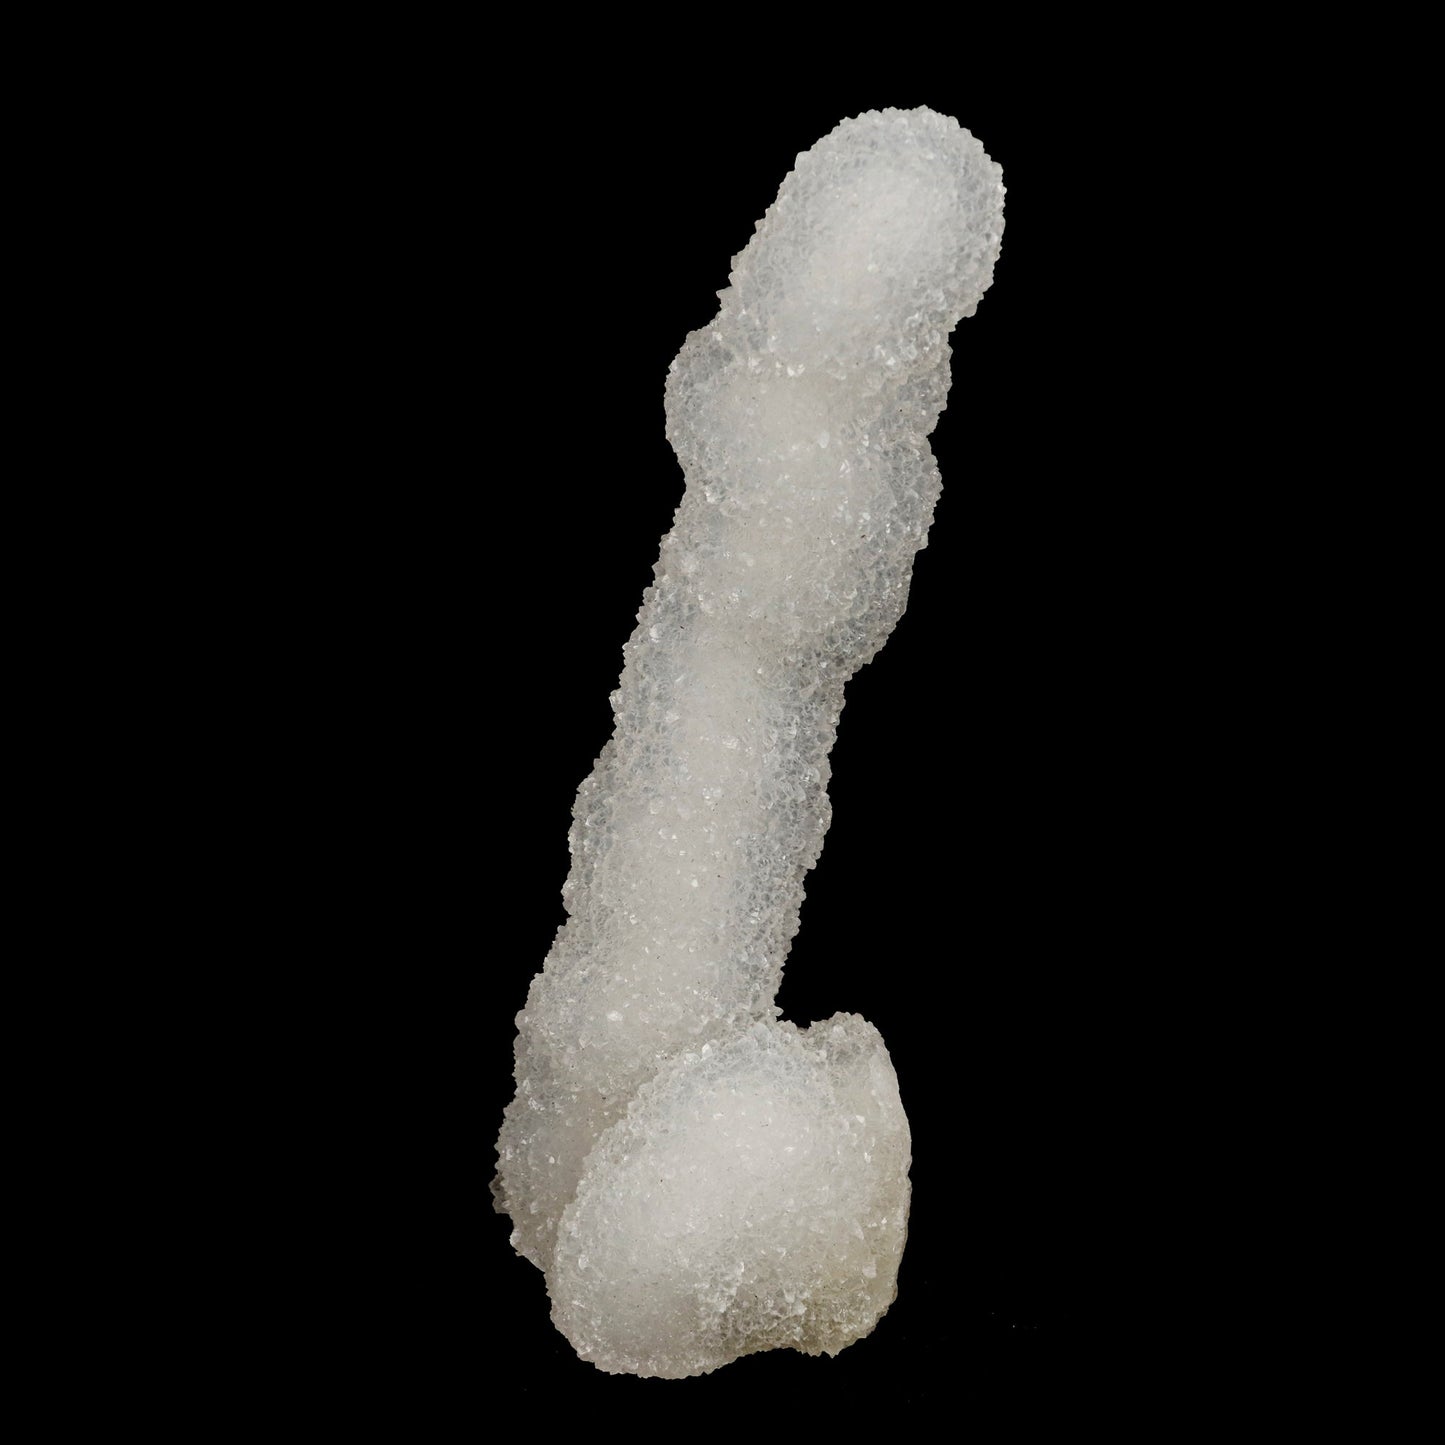 MM Quartz Stalactite Natural Mineral Specimen # B 5246  https://www.superbminerals.us/products/mm-quartz-stalactite-natural-mineral-specimen-b-5246  Features: It is encrusted for splendid white, microcrystalline Quartz crystals inside a glossy, glossy coating of Apophyllite crystals. Those lustre, colour, What's more Precious stone arrangement would every one great. To great condition, it is a amazing and magnetic example. Primary Mineral(s): MM QuartzSecondary